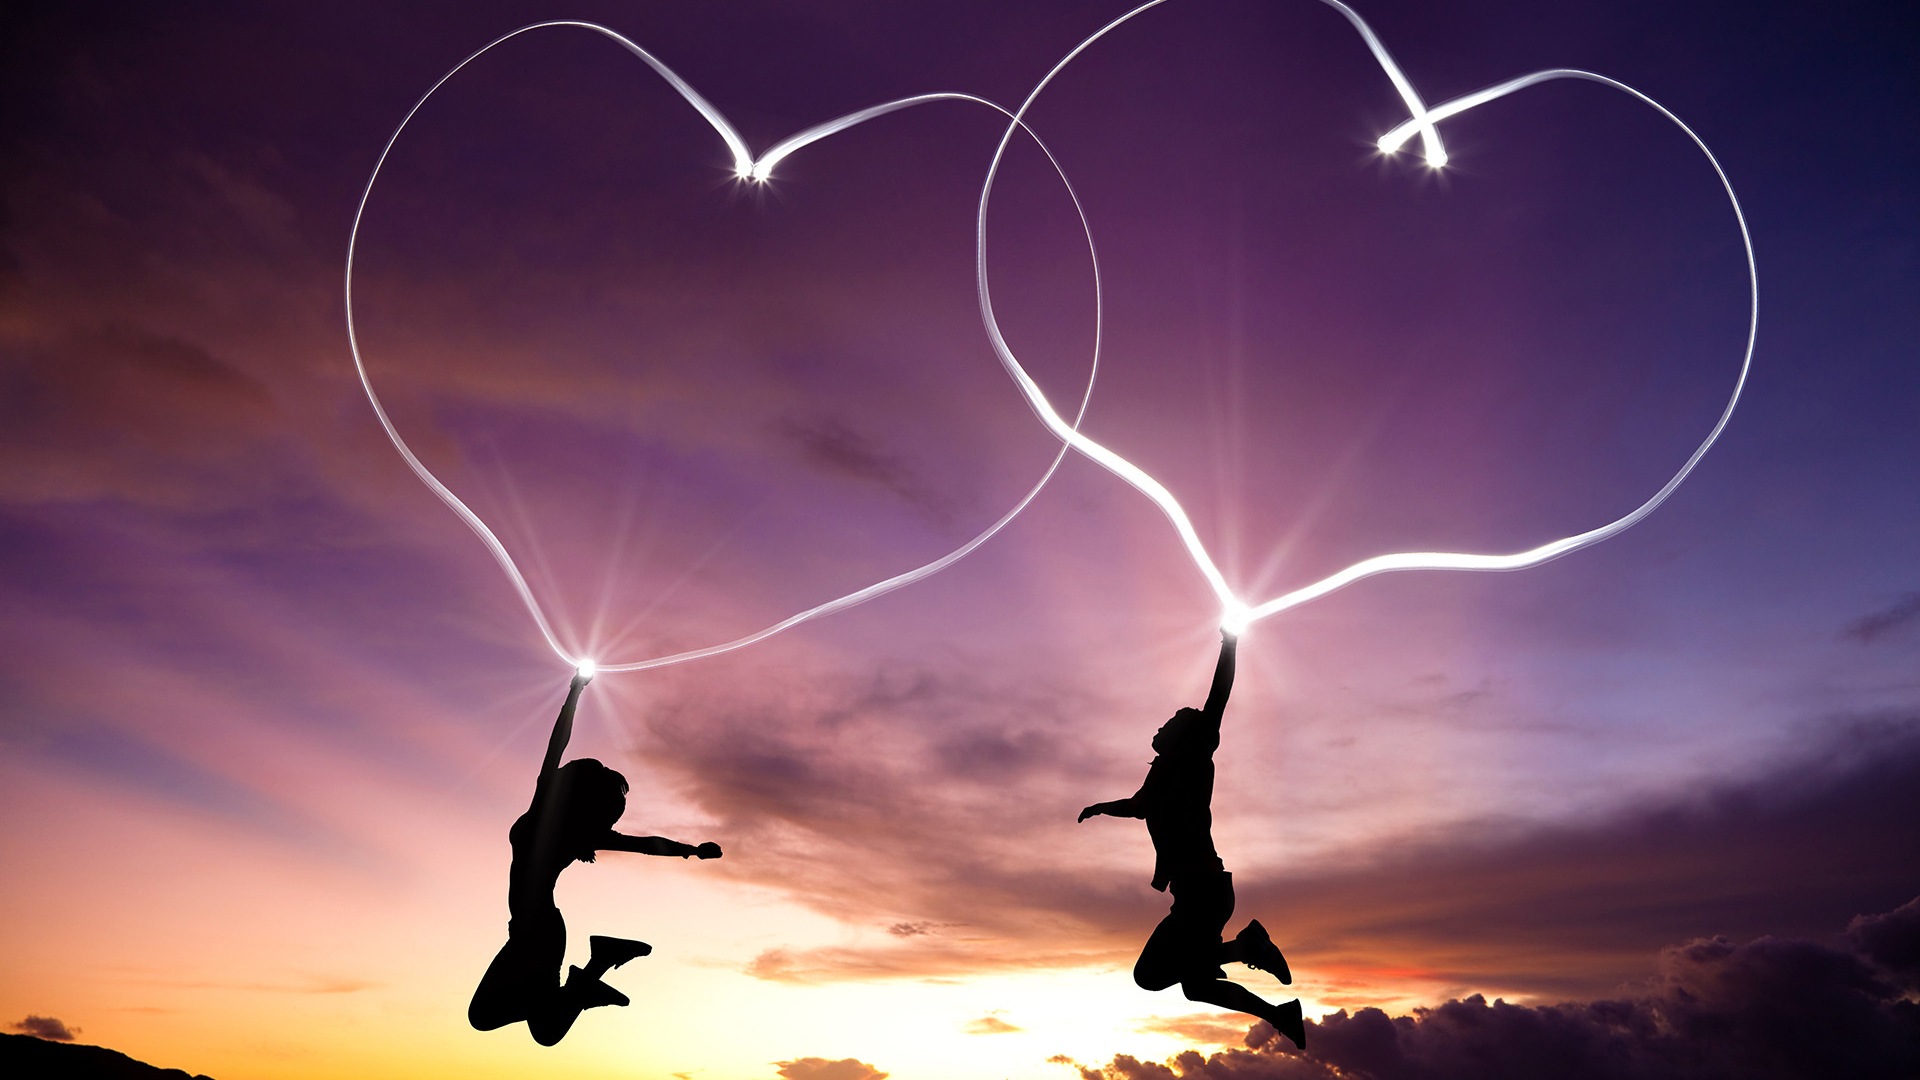 The theme of love, creative heart-shaped HD wallpapers #14 - 1920x1080